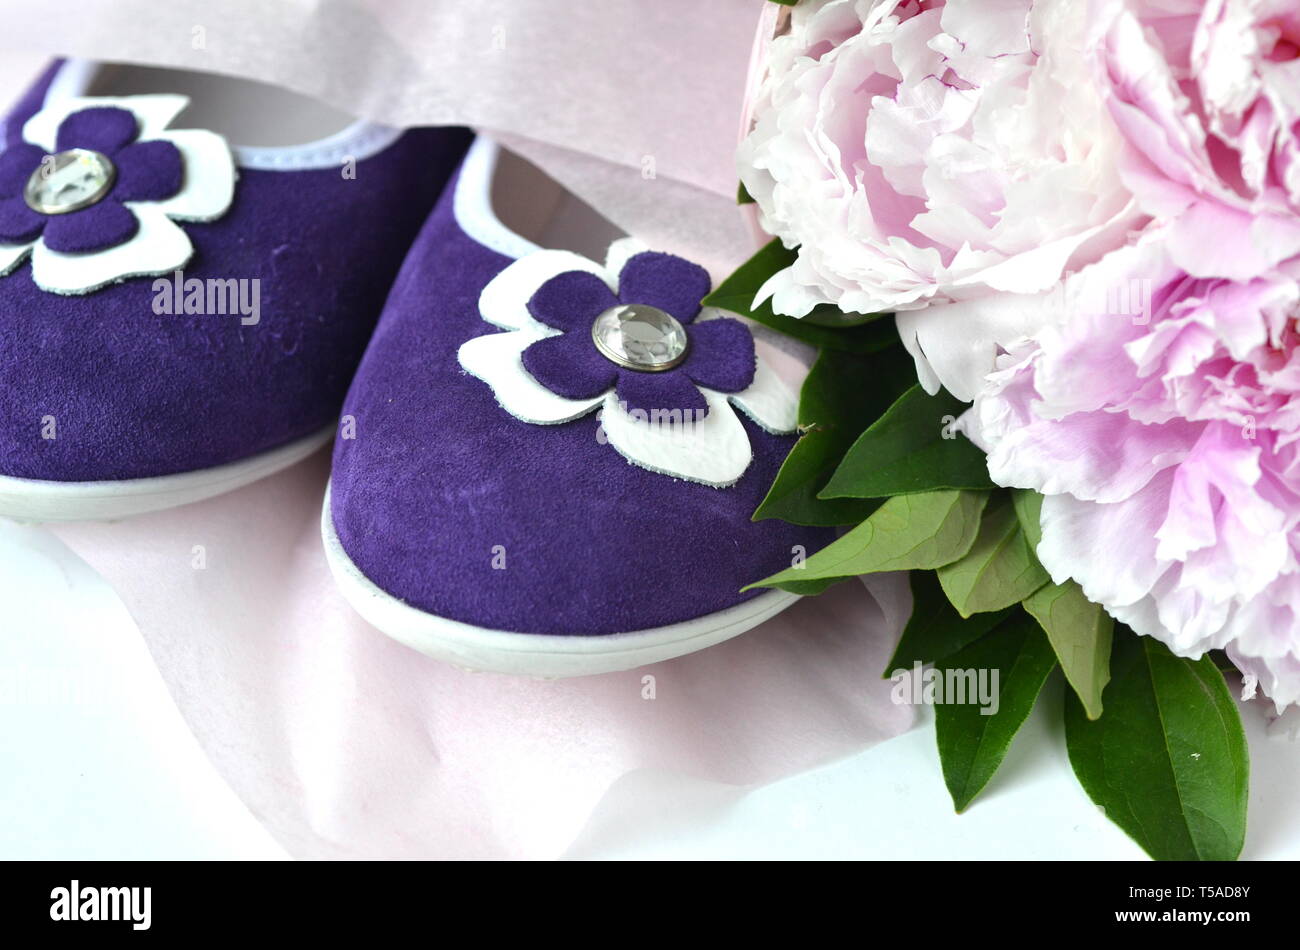 Purple violet suede leather ballerina flats shoes with blush pink peonies bouquet wrapped in a tissue paper with copy space Stock Photo